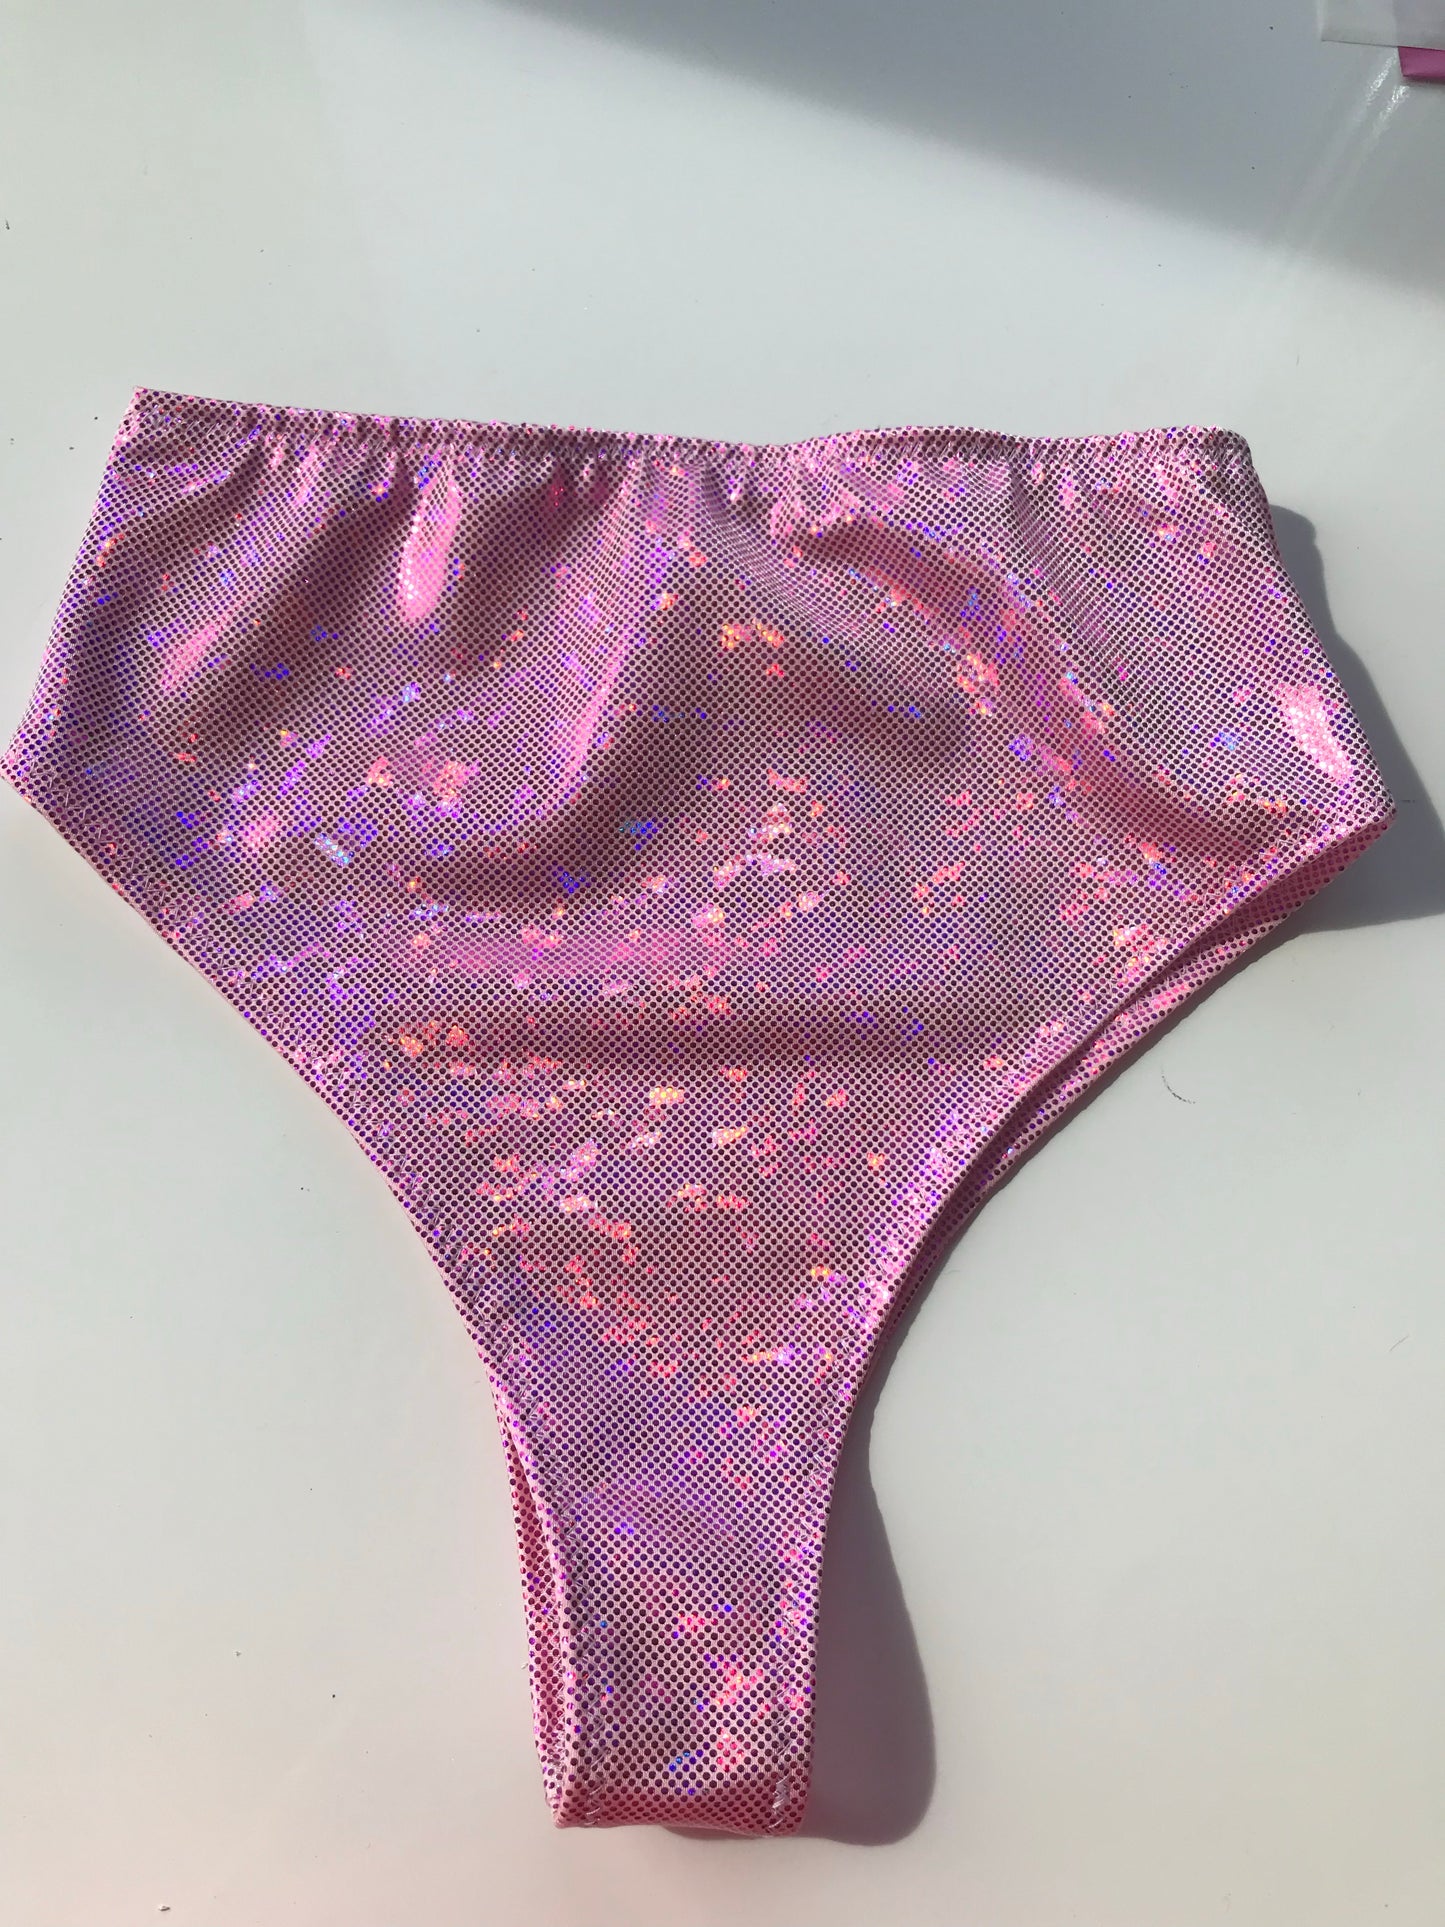 SALE - Holographic High Waisted Cheeky Rave Bottoms, AVAILABLE IN MORE COLORS